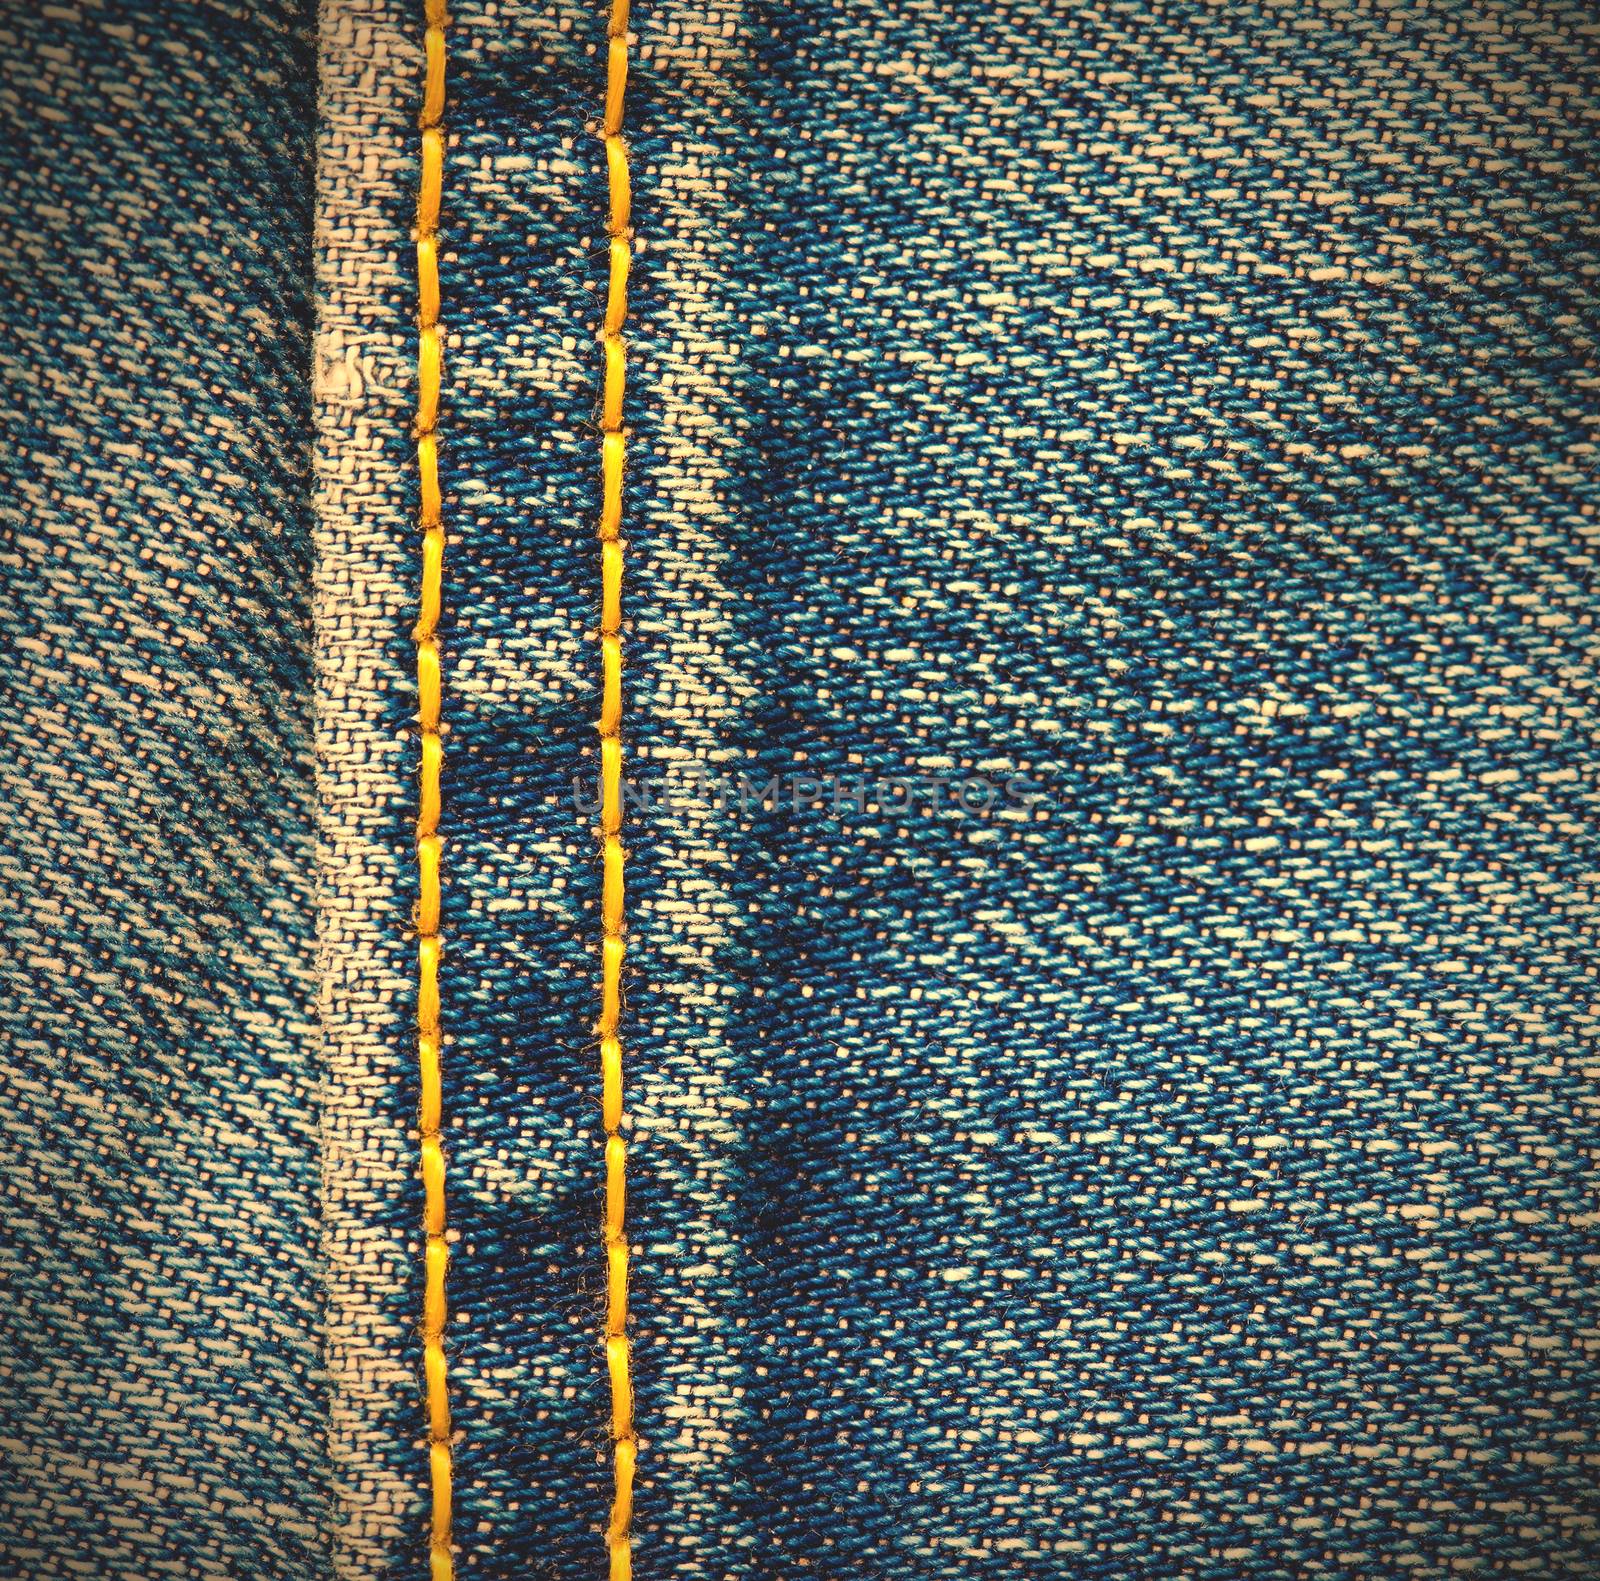 seam on the jeans, close-up. instagram image style